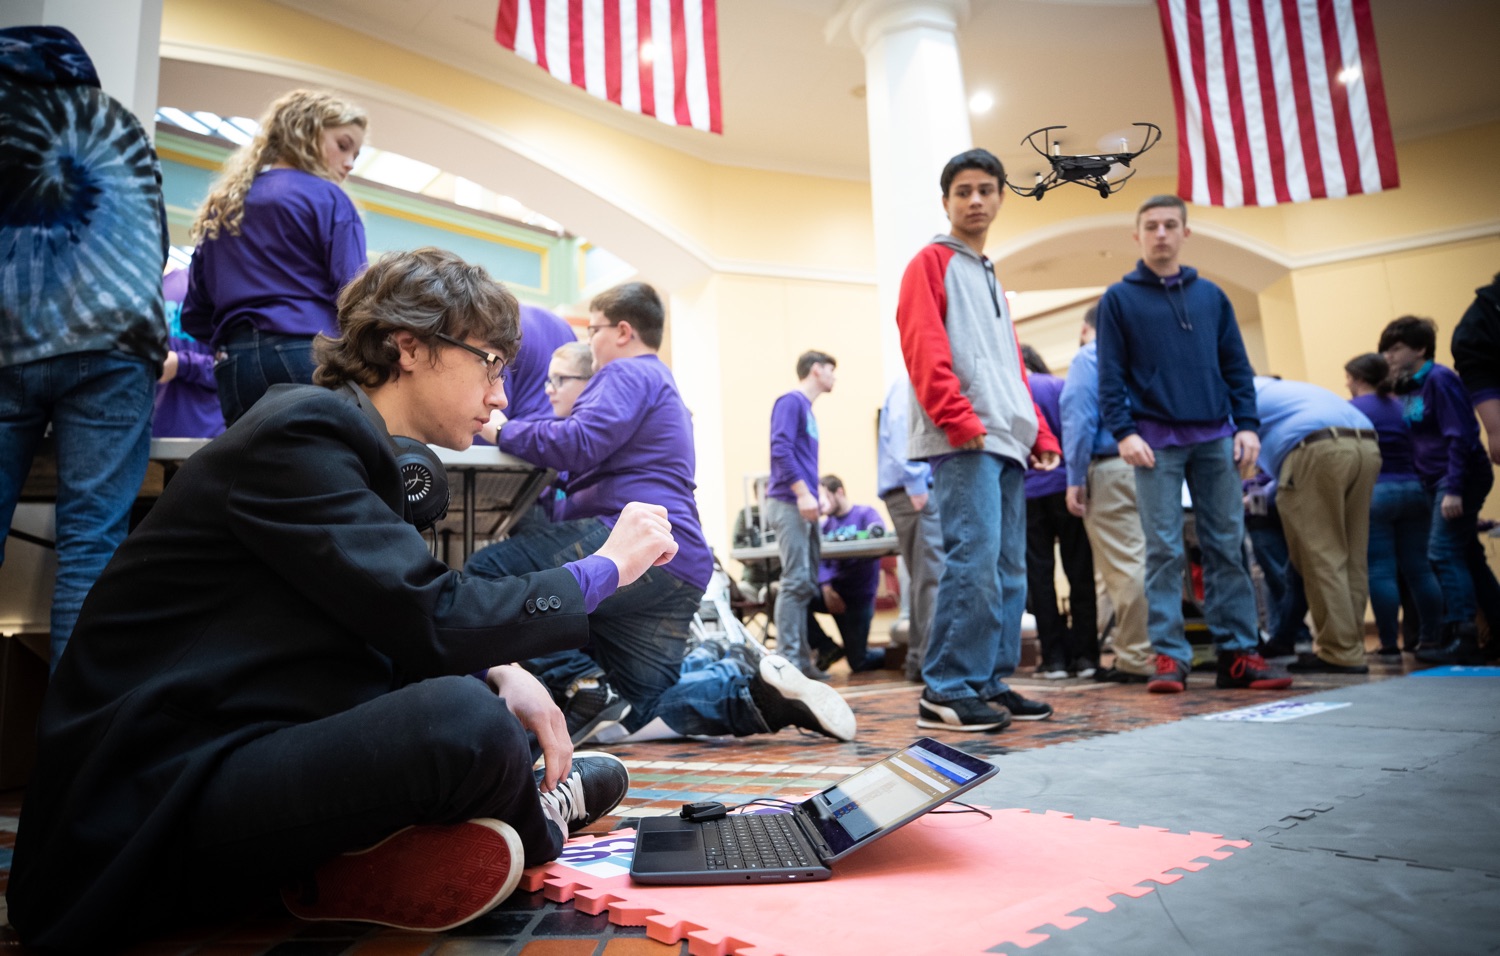 Students fly a drone during the robotics demonstration.  Celebrating the success of the PAsmart workforce development program to create educational opportunities at schools across the commonwealth, Governor Tom Wolf welcomed more than 50 students from the Pennsylvania Rural Robotics Initiative to the Capitol today. The students from nine western Pennsylvania school districts showcased their skills in coding, robotics and drone technology. The Wolf administration awarded the initiative a $299,000 PAsmart Advancing Grant earlier this year. Harrisburg, PA  Tuesday, November 12, 2019<br><a href="https://filesource.amperwave.net/commonwealthofpa/photo/17587_gov_pasmart_rural_robotics_dz_021.jpg" target="_blank">⇣ Download Photo</a>